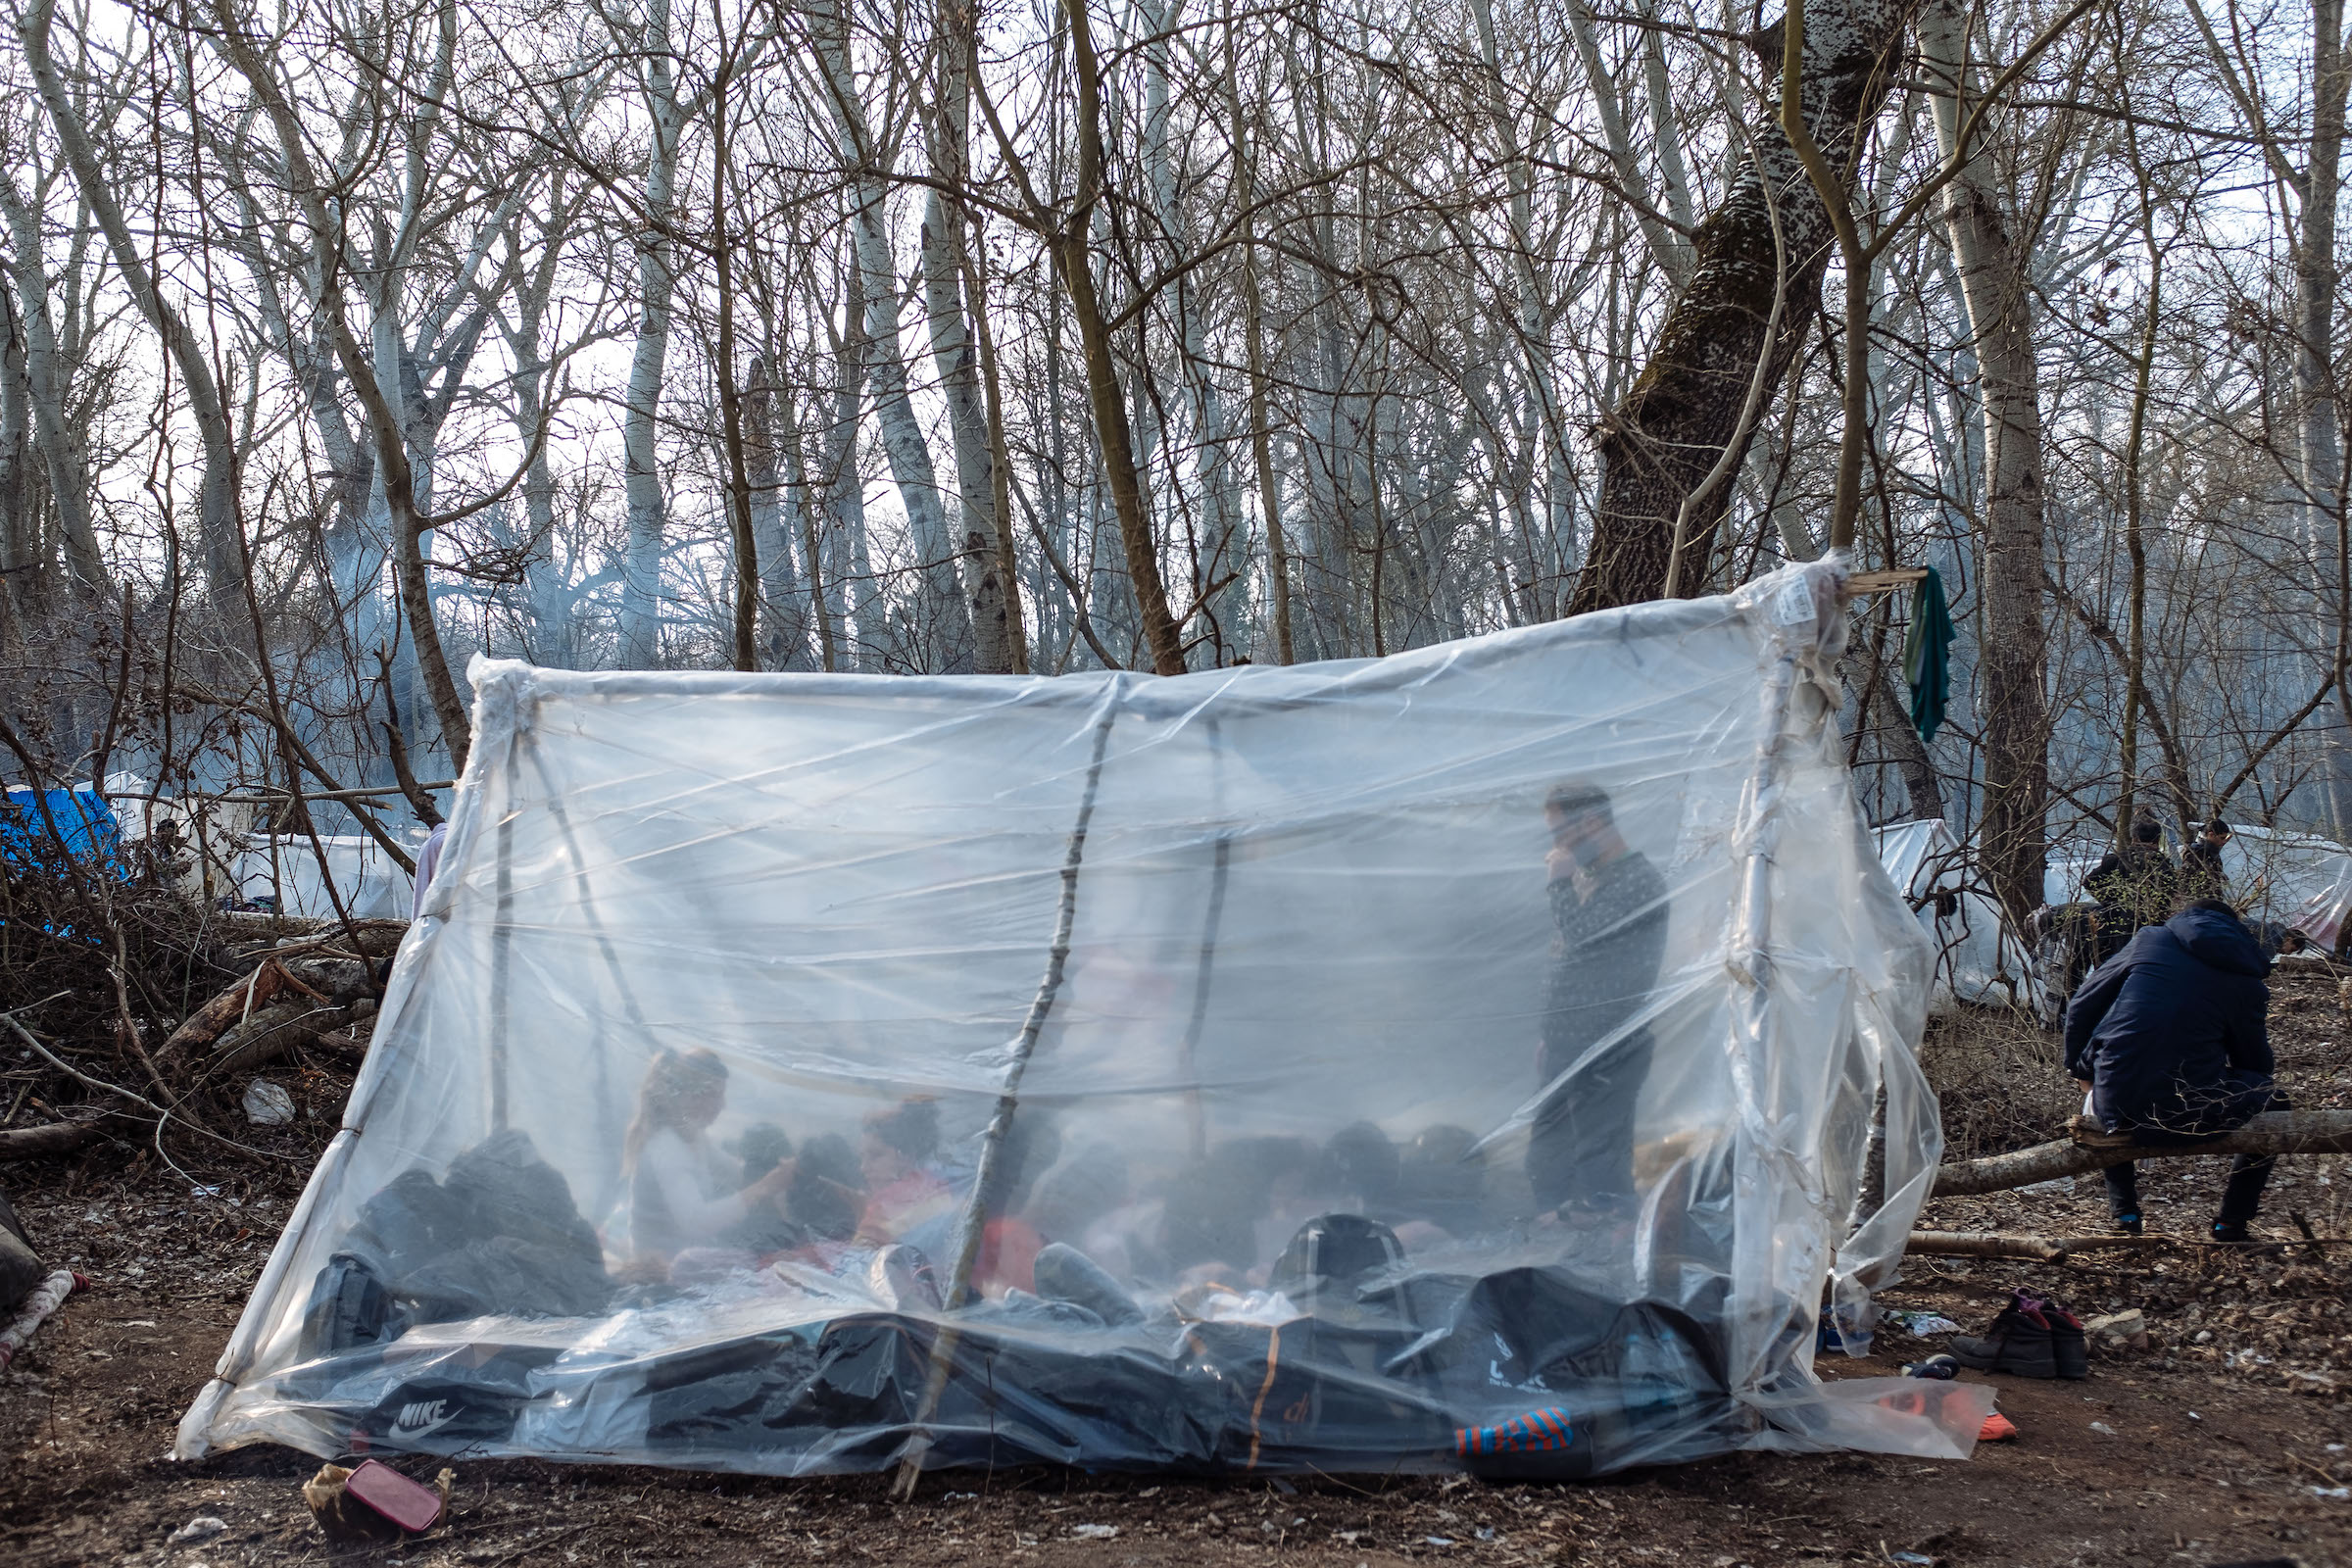 A tent made of propped-up branches, wrapped in plastic, in Edirne. Many migrants slept in the area for days, waiting for a chance to cross the border.